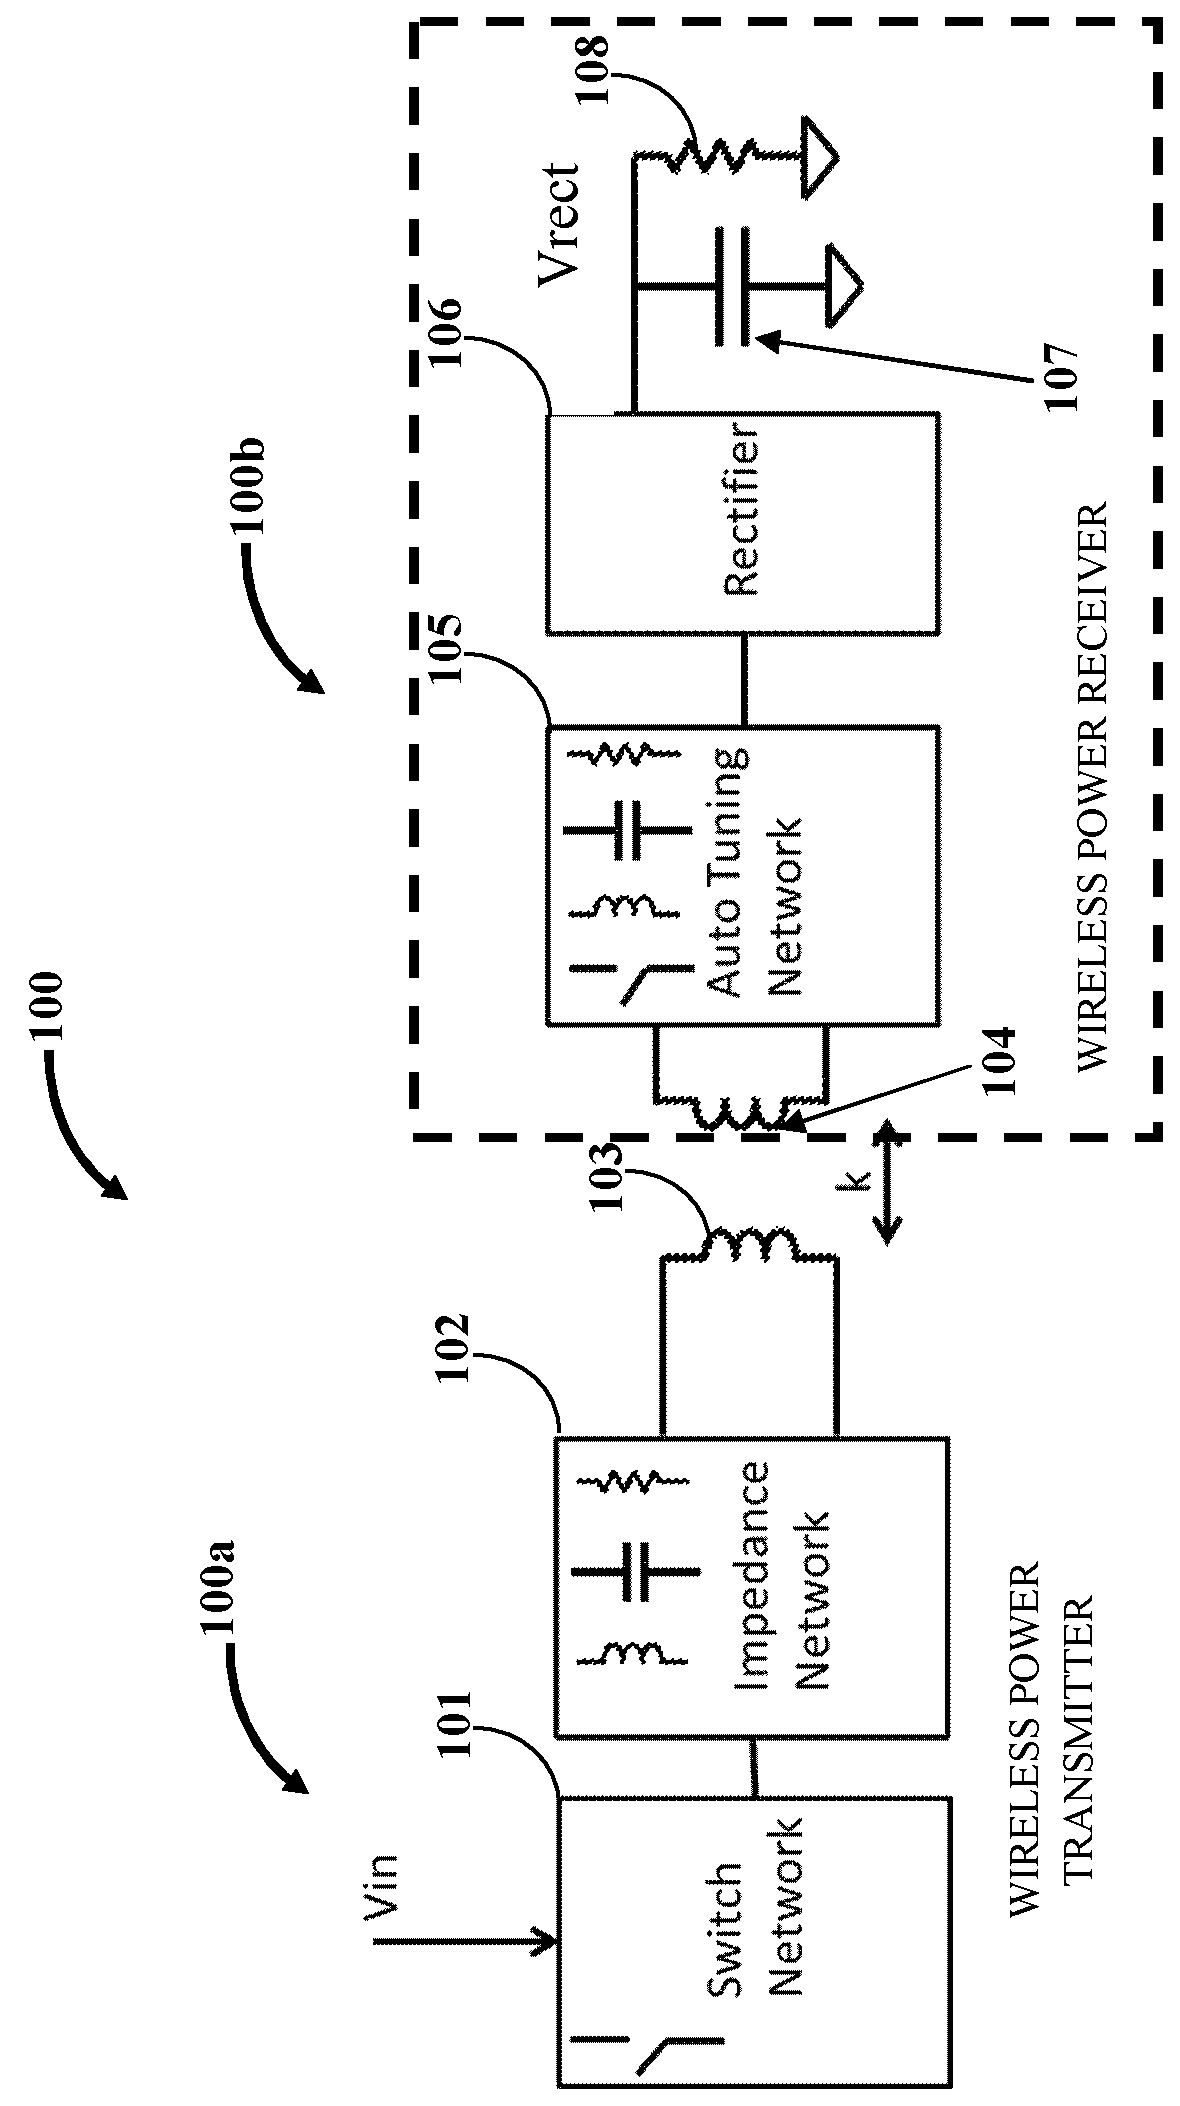 Wireless power system with a self-regulating wireless power receiver